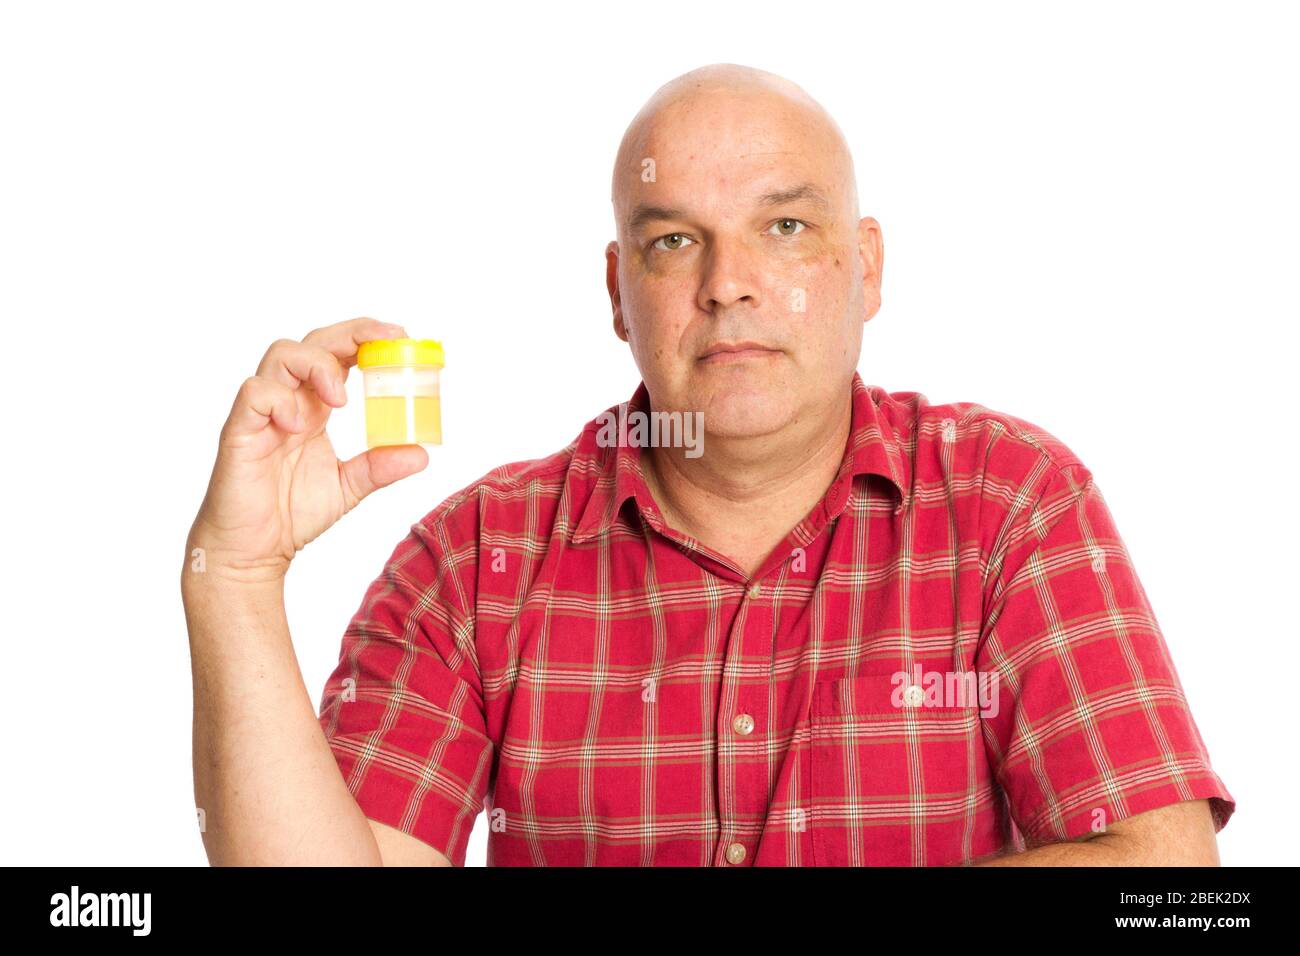 A guy holding a urine sample on white, bald from chemotherapy. Stock Photo